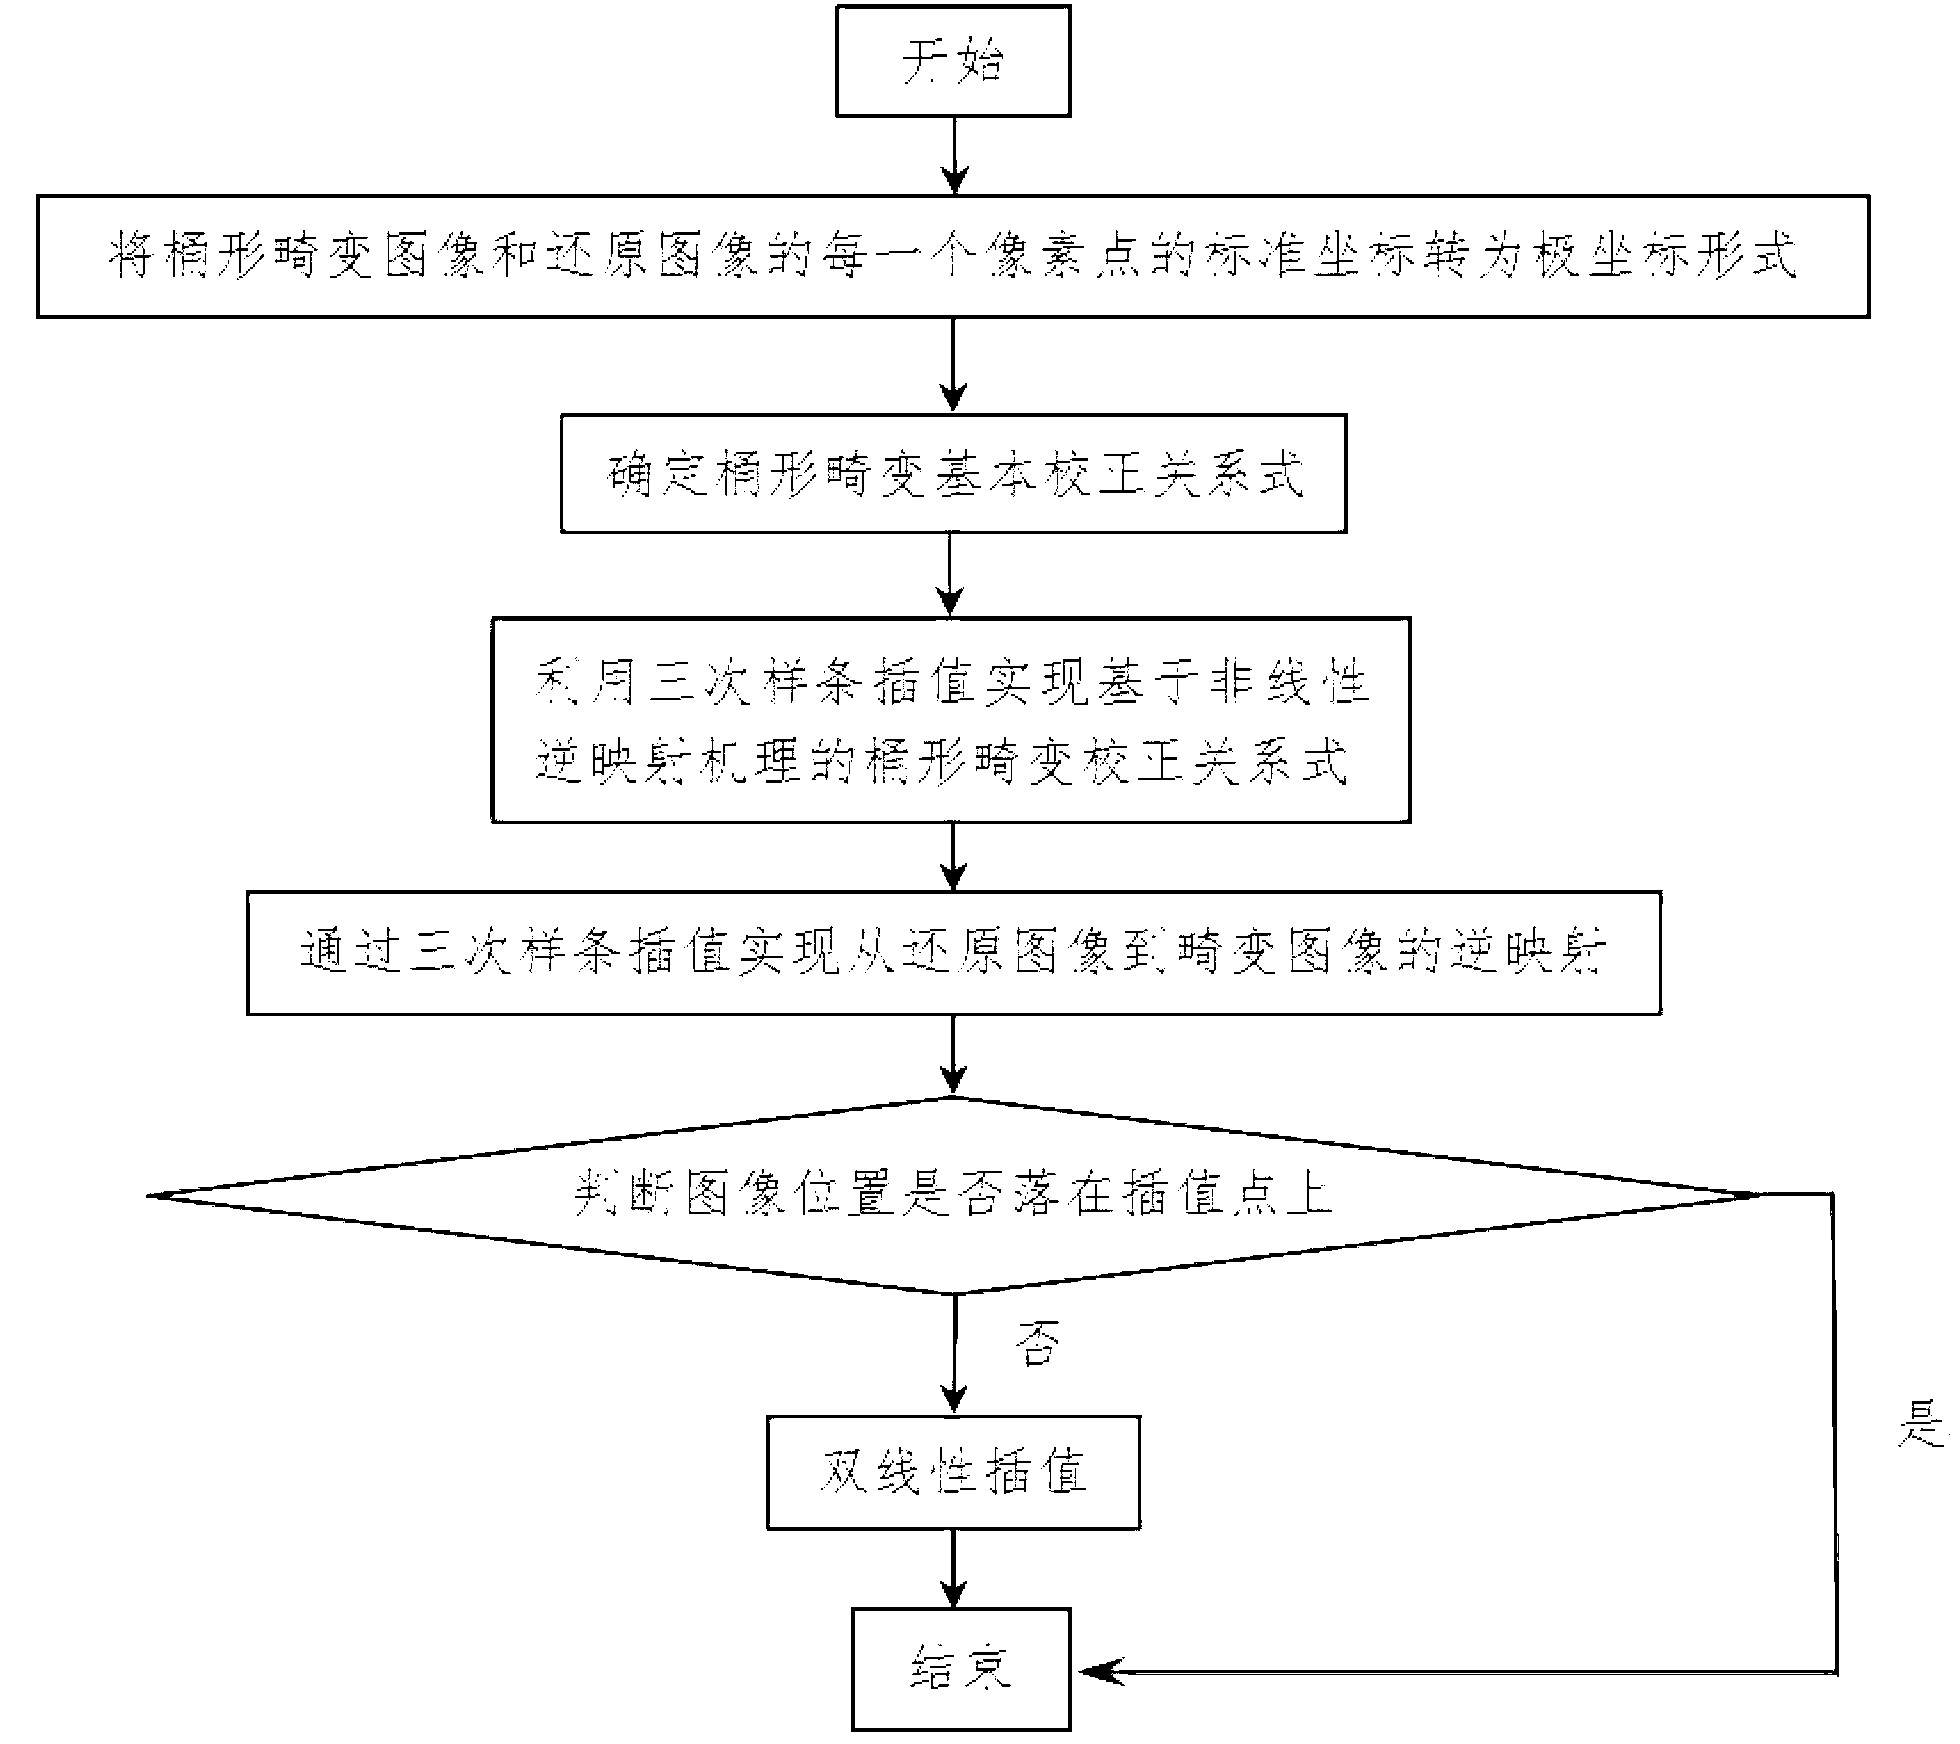 Serious barrel distortion image correction method based on nonlinearity inverse mapping principle